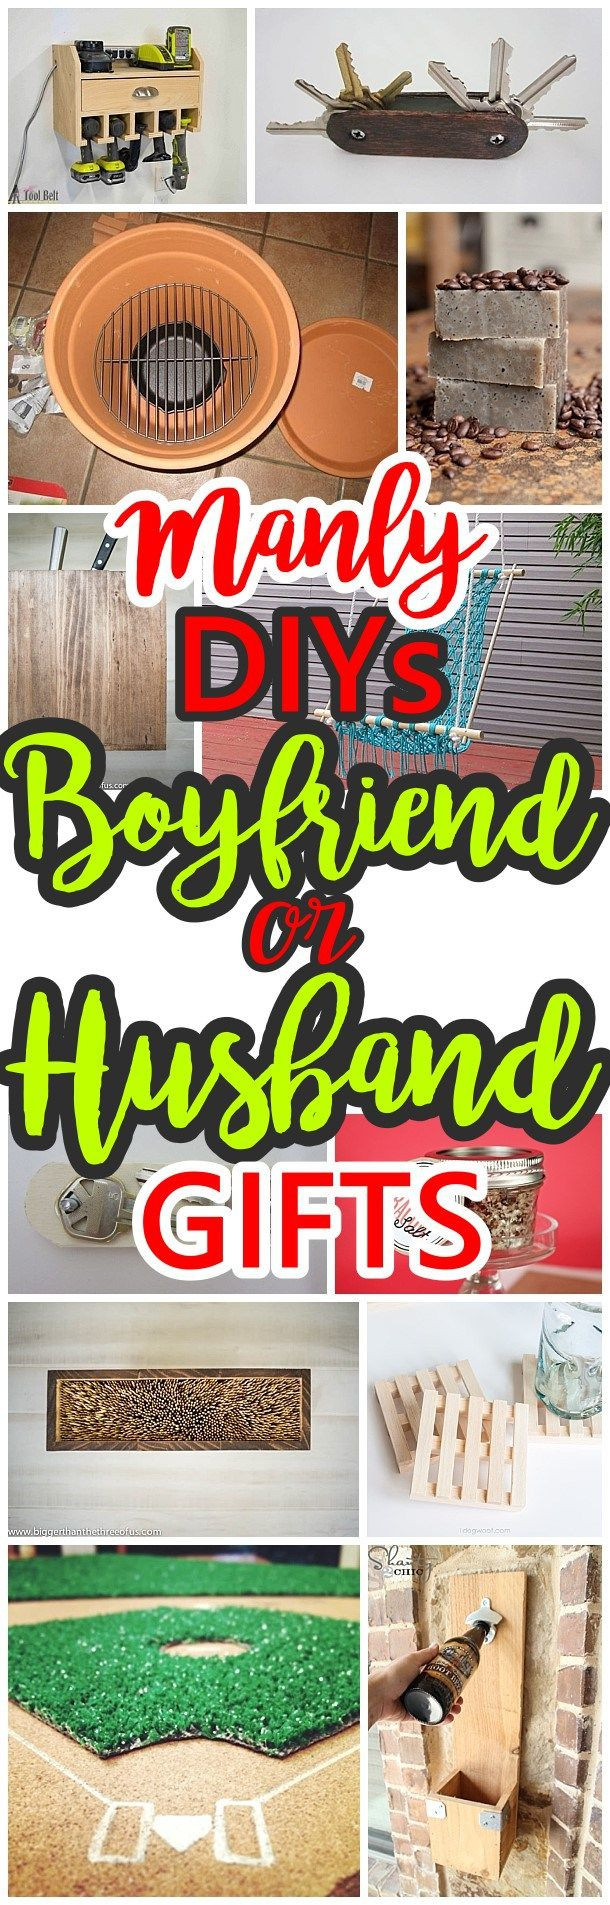 DIY Christmas Gifts For Brothers
 Best 25 Men ts ideas on Pinterest